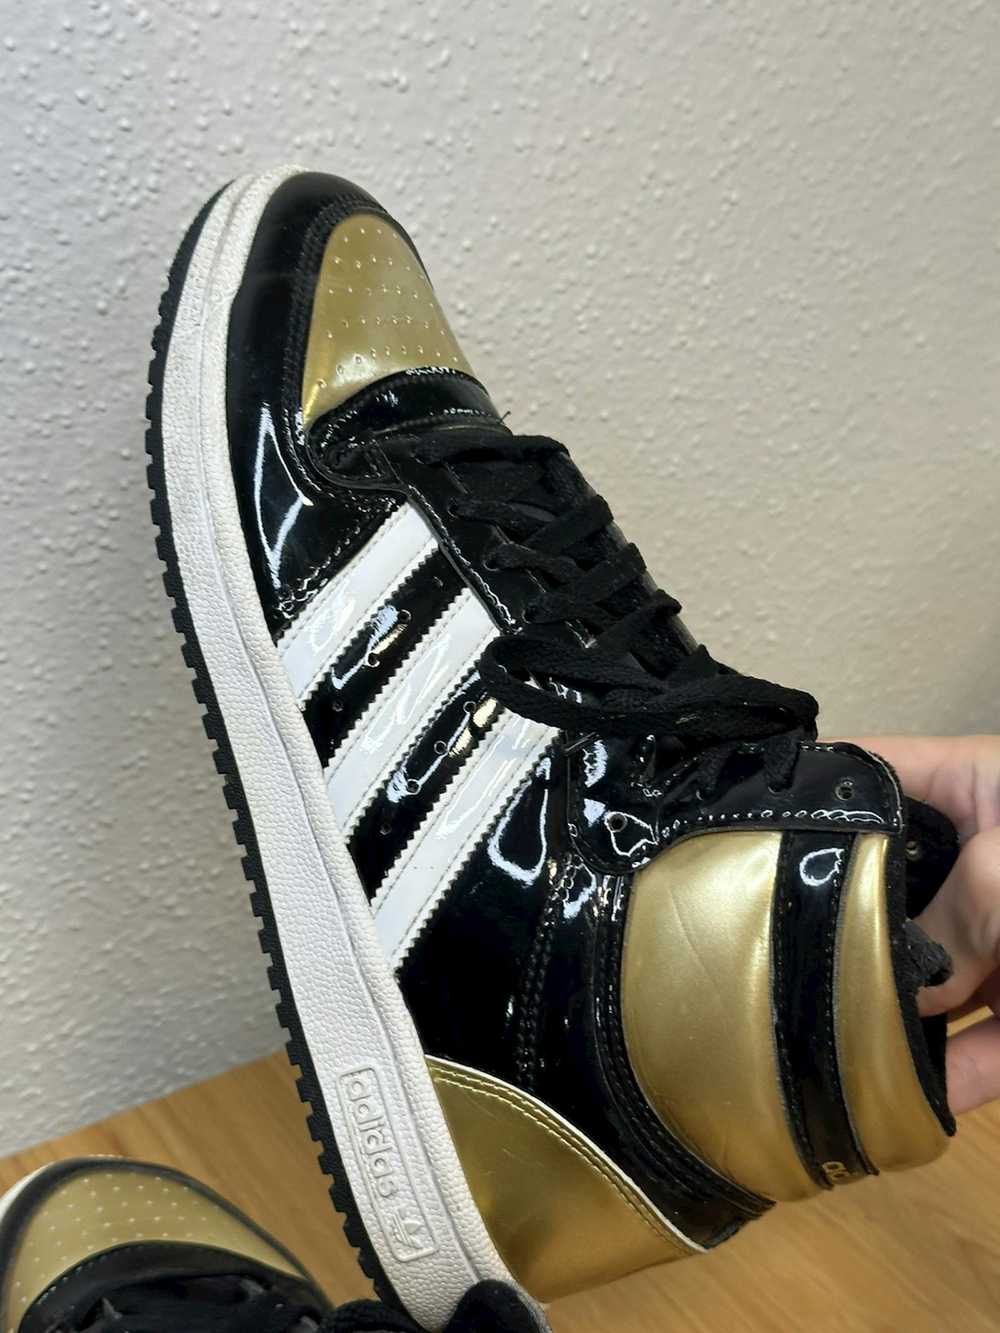 Adidas Top Ten RB Black Gold Patent size 9 - image 5